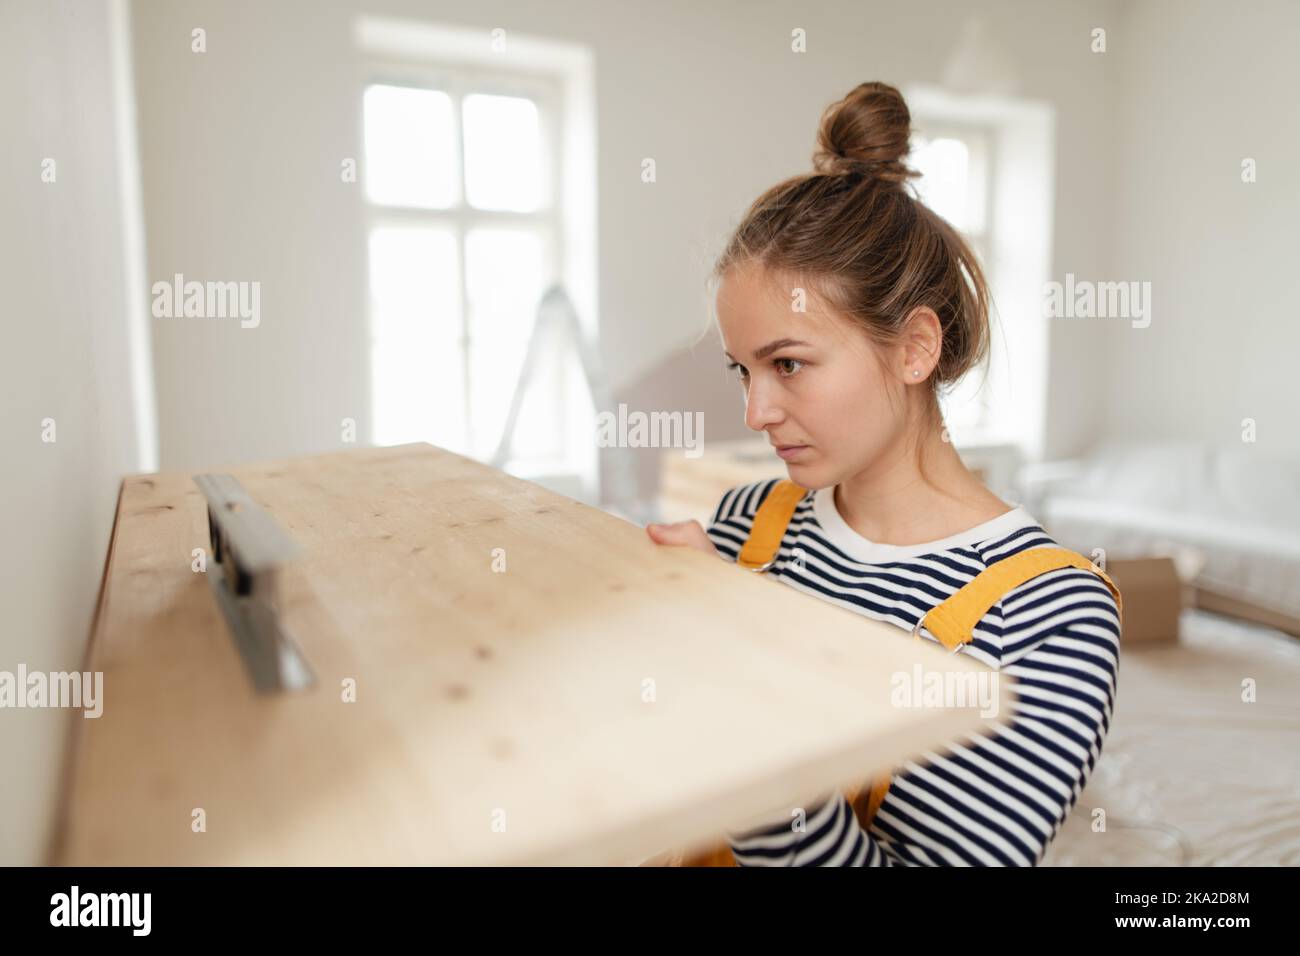 Young woman remaking her apartment, measuring wall with spirit level and hanging shelf. Stock Photo